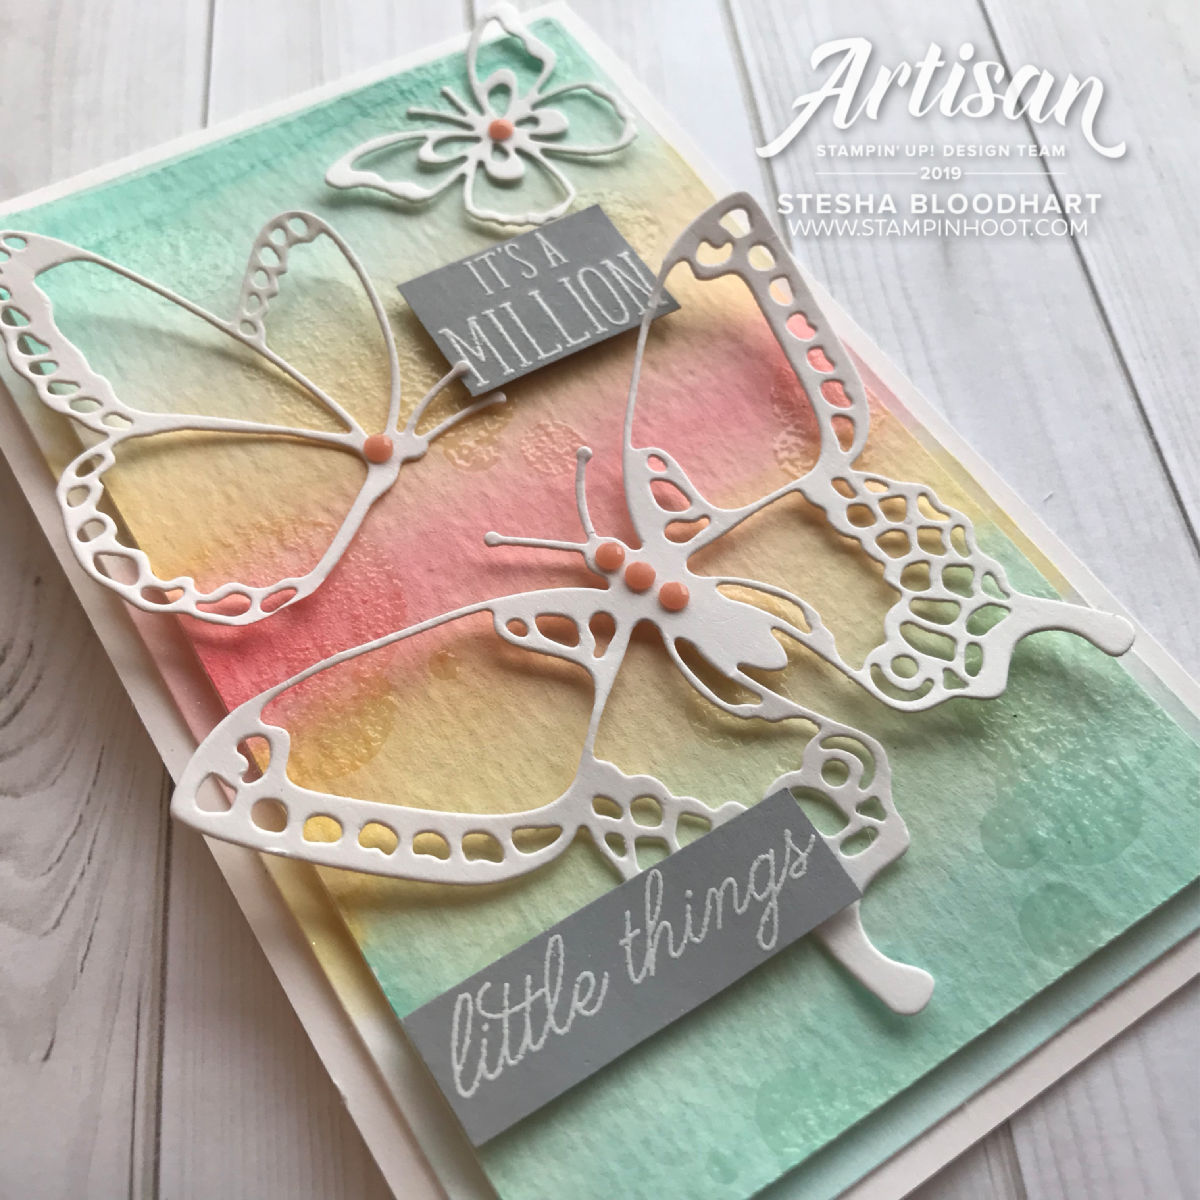 Beauty Abounds Bundle by Stampin' Up! Pastel Butterfly Card by Stesha Bloodhart, Stampin' Hoot! Stamp Review Crew(1)